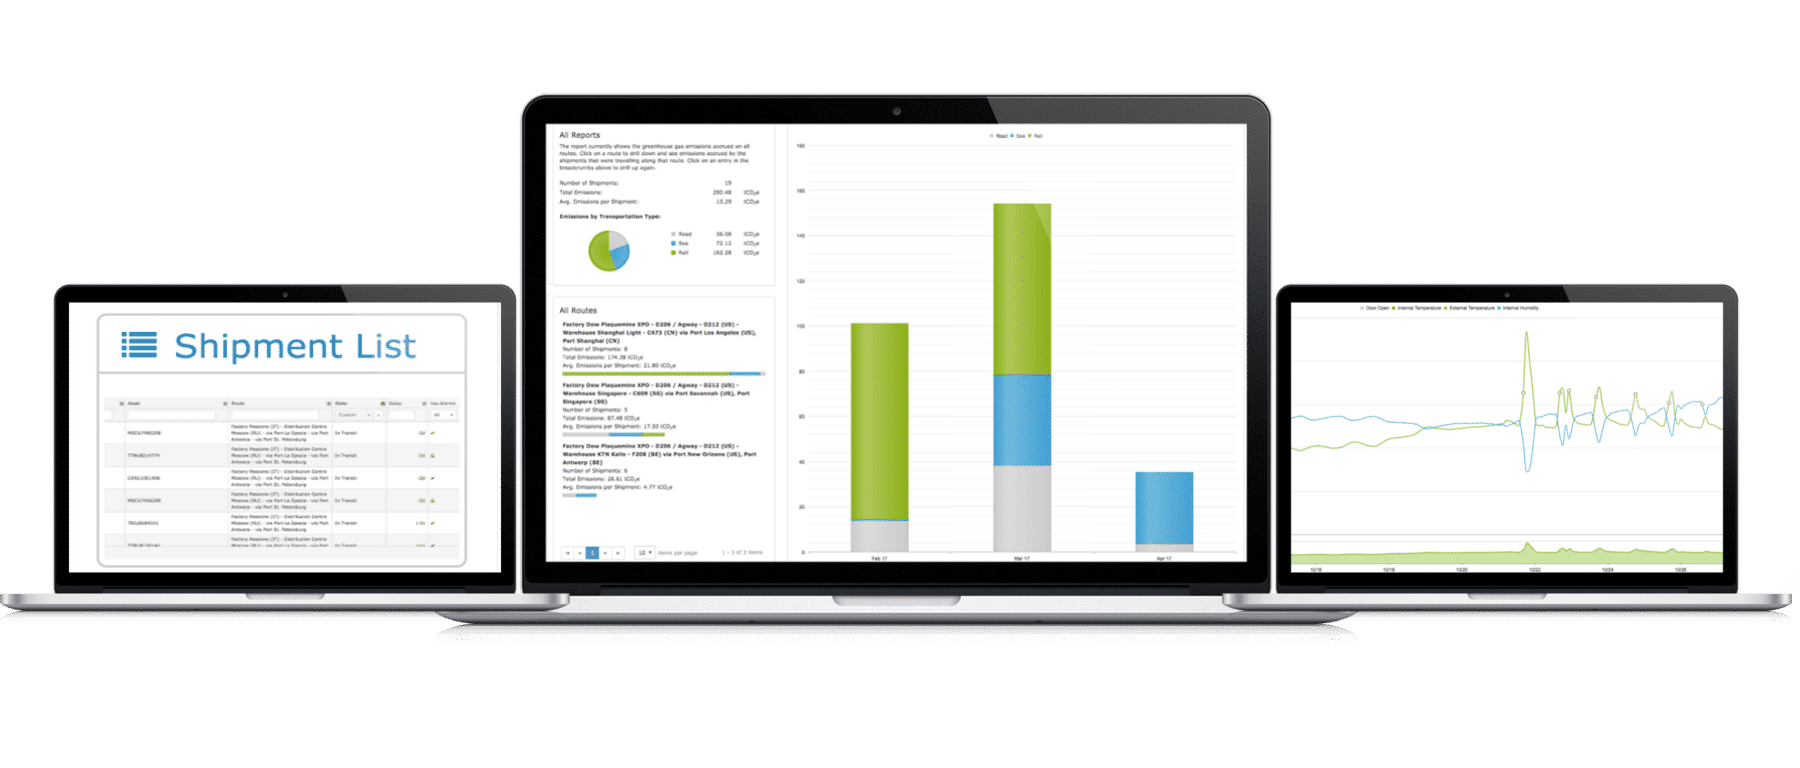 Carbon footprint reporting dashboard